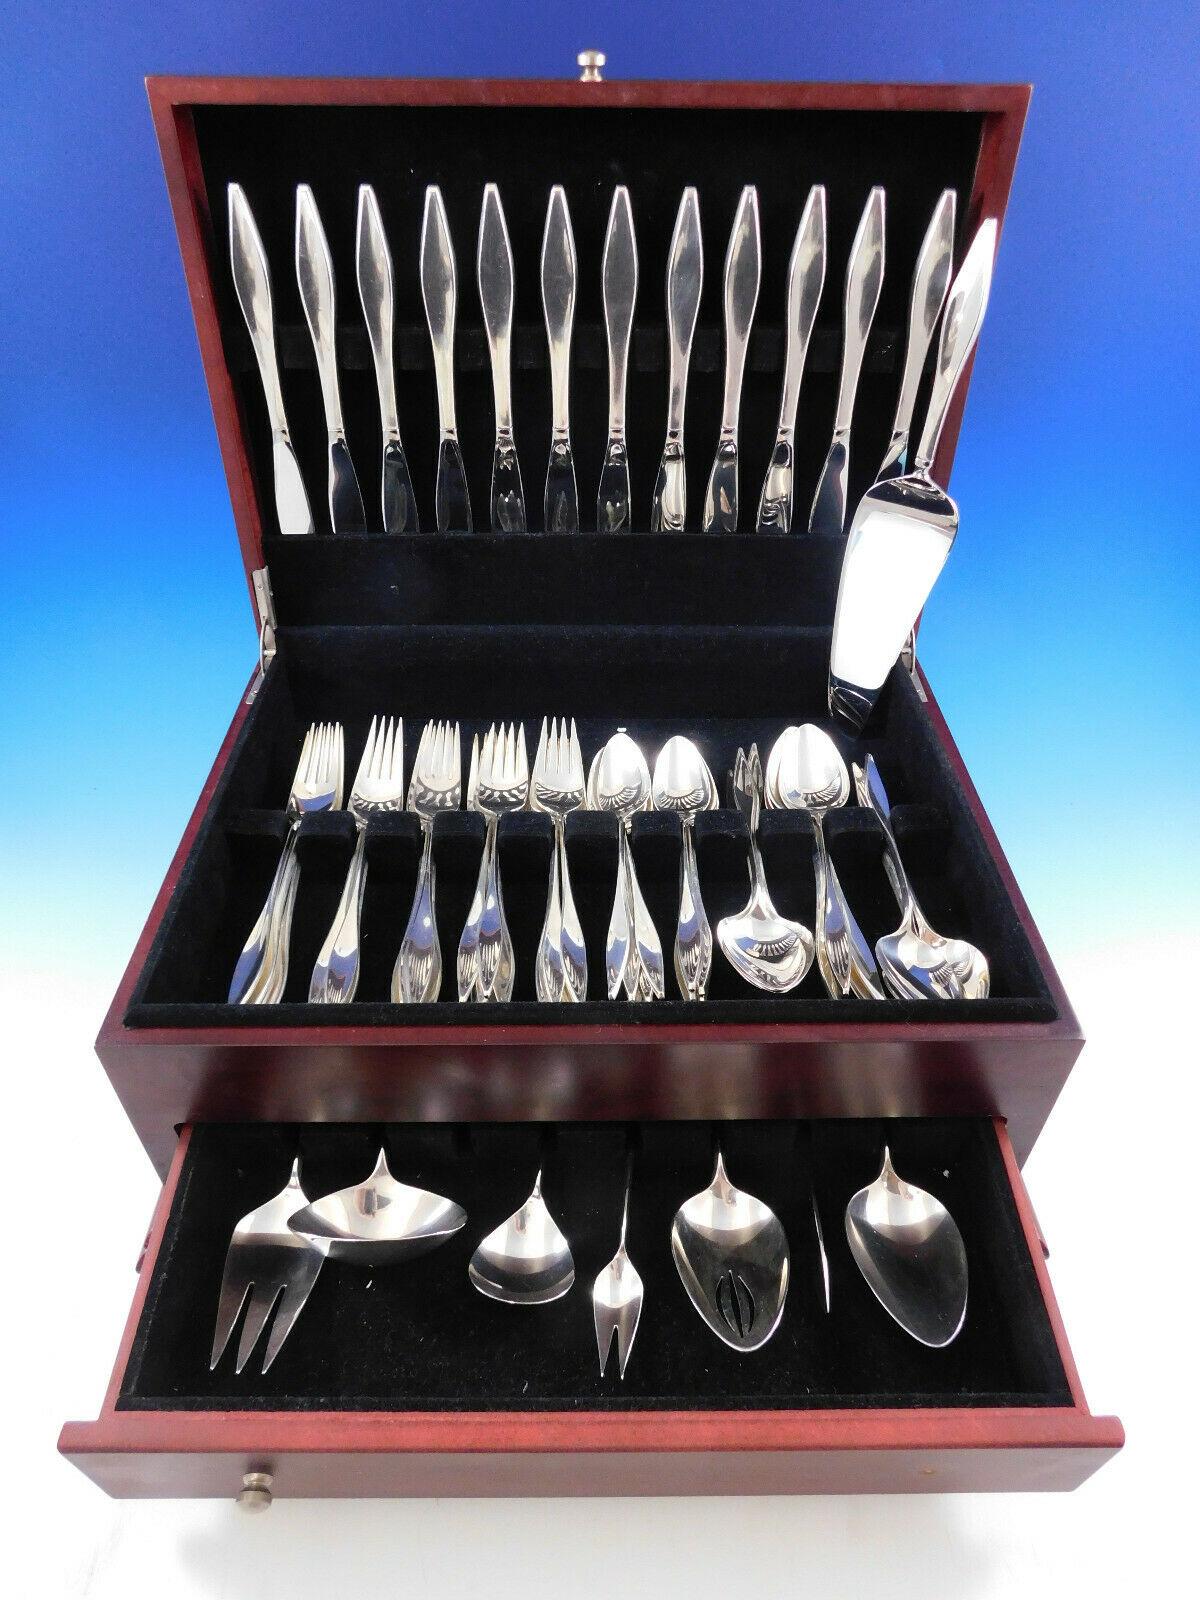 Mid-Century Modern Lark By Reed & Barton sterling silver Flatware set - 48 Pieces. Designed by John Prip. John Prip (1922-2009) was a master metalsmith known for setting standards of excellence in American metalsmithing. His works and designs have